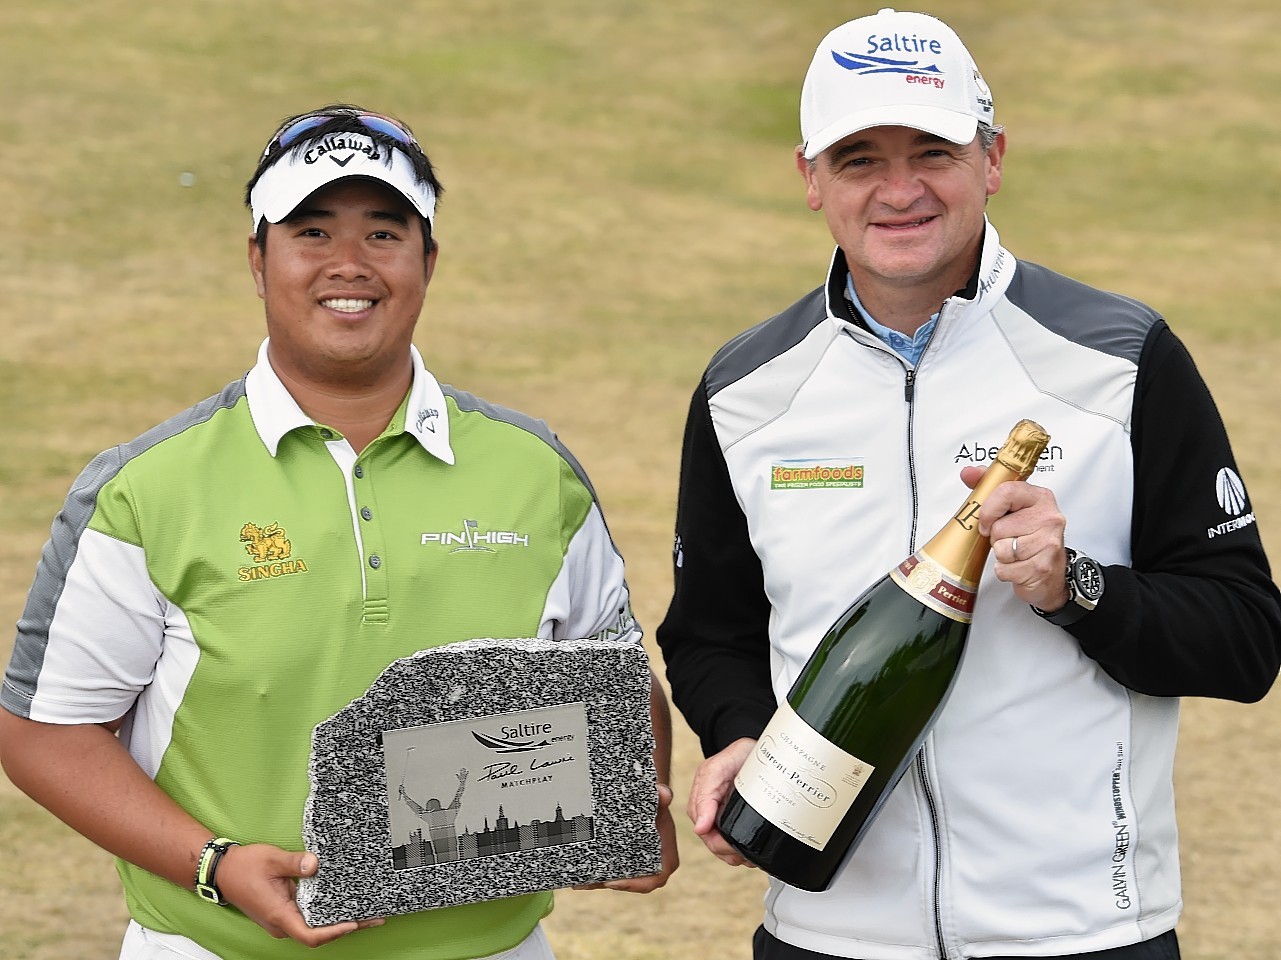 Saltire Energy Paul Lawrie Match Play winner Kiradech Aphibarnrat with host Paul Lawrie. Picture by Colin Rennie